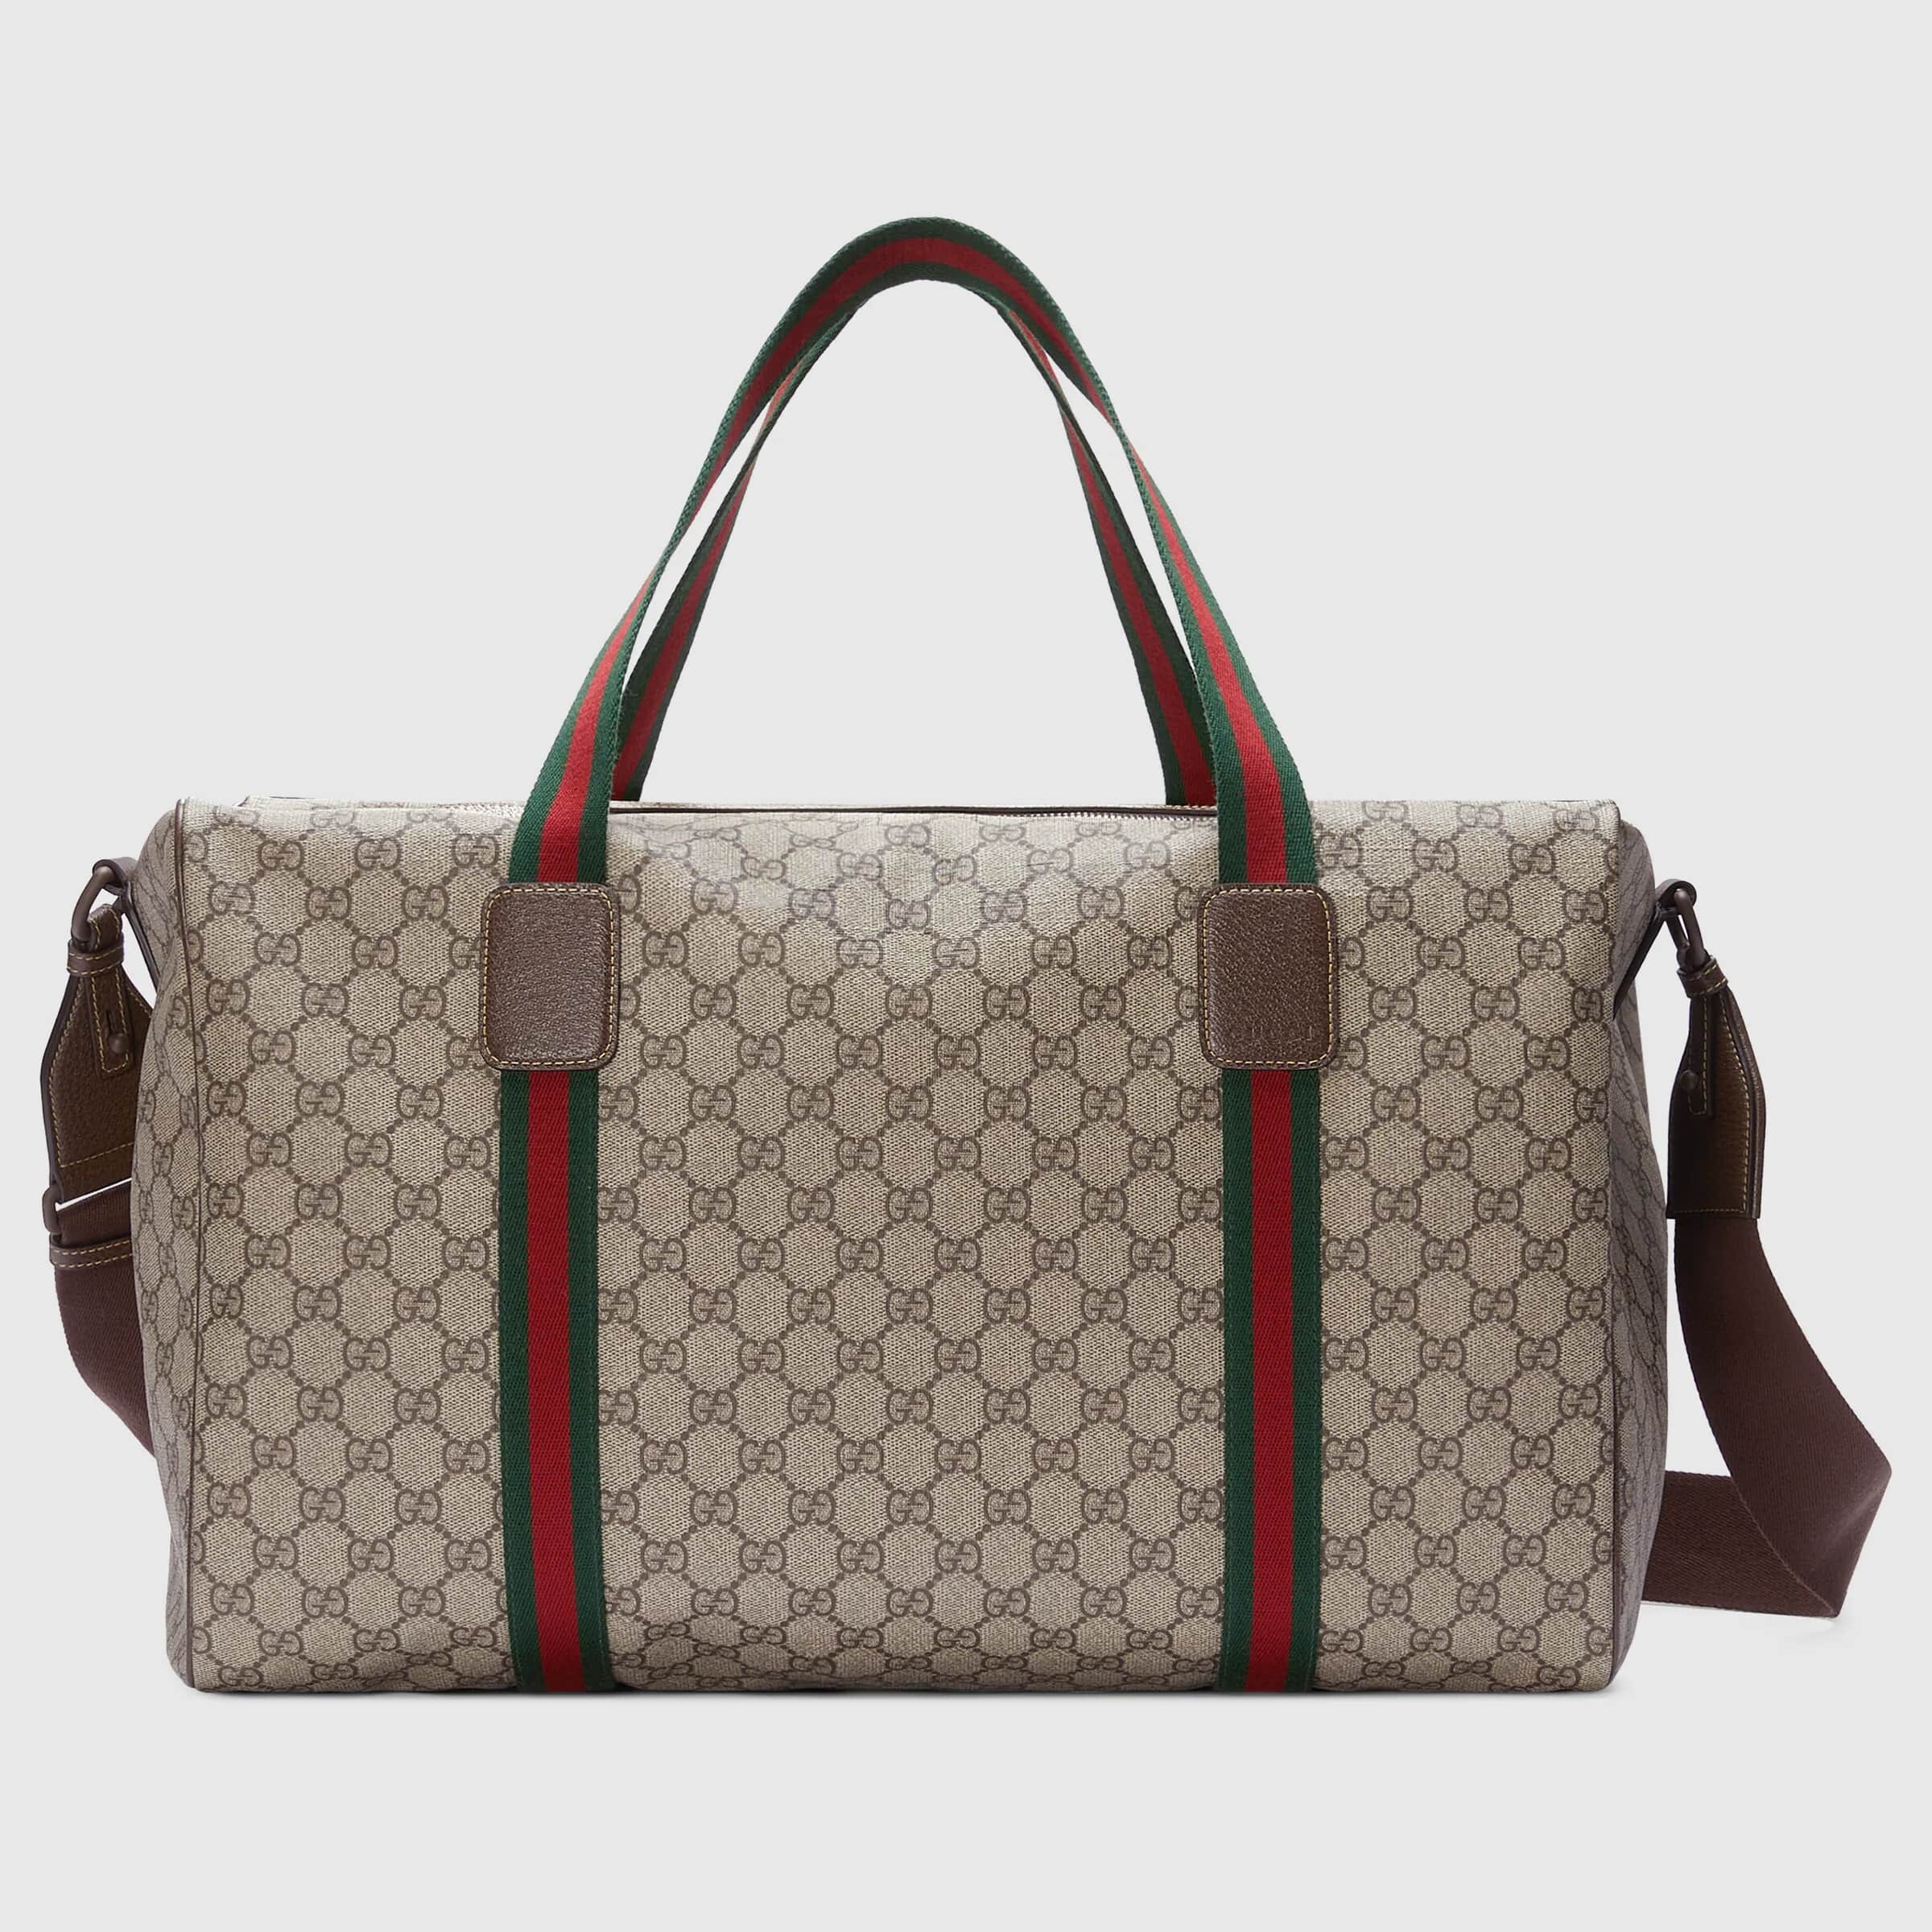 Gucci duffle bag with web